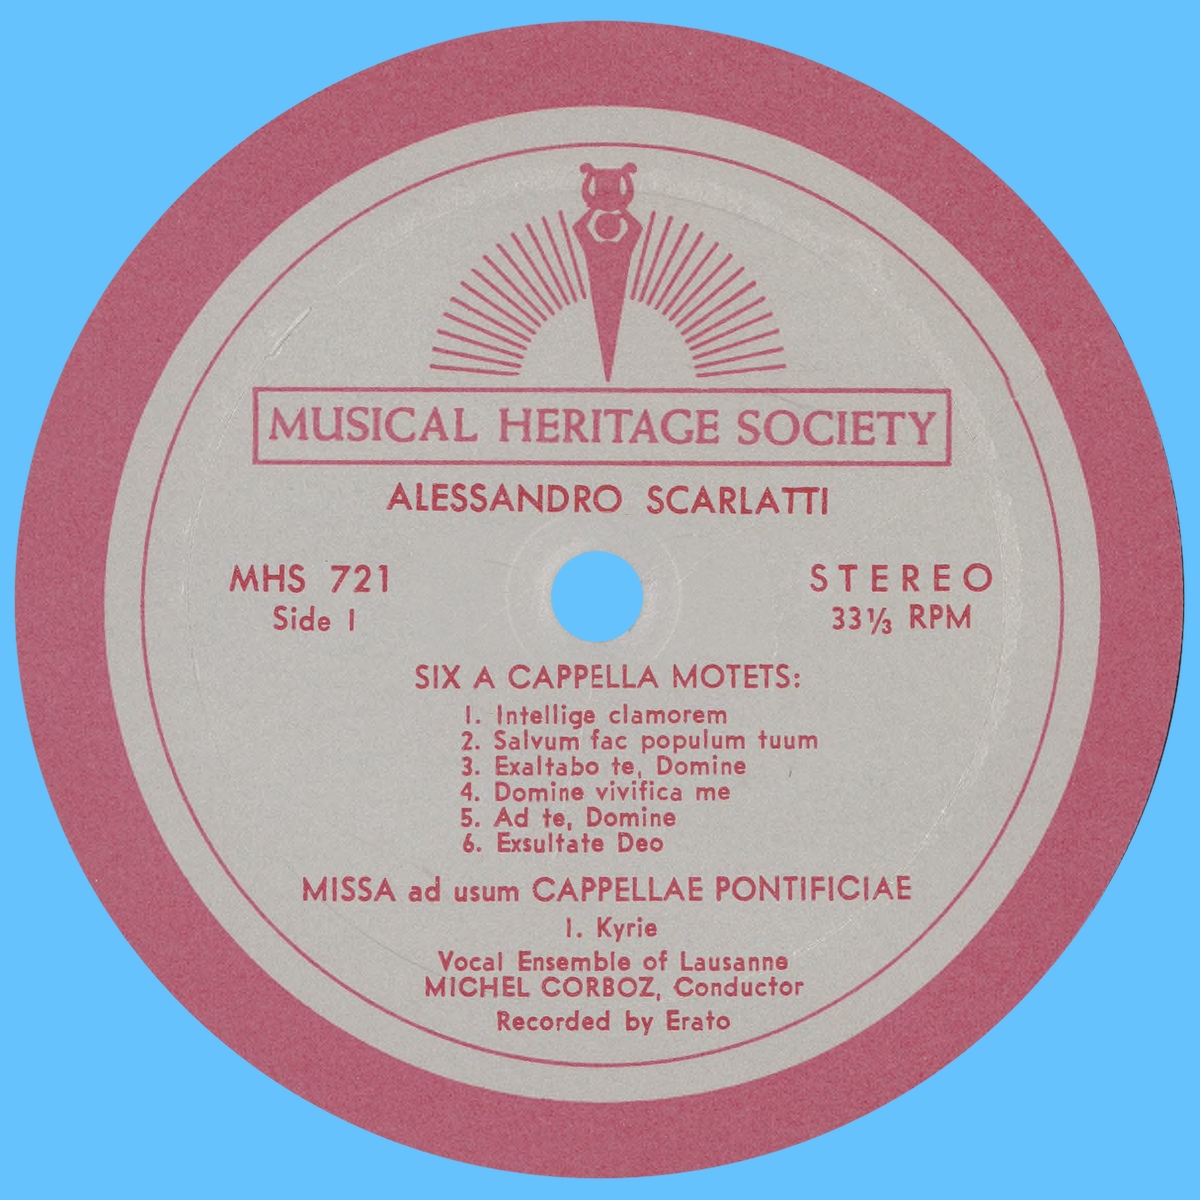 Étiquette recto du disque „The Musical Heritage Society Inc.“ MHS 721